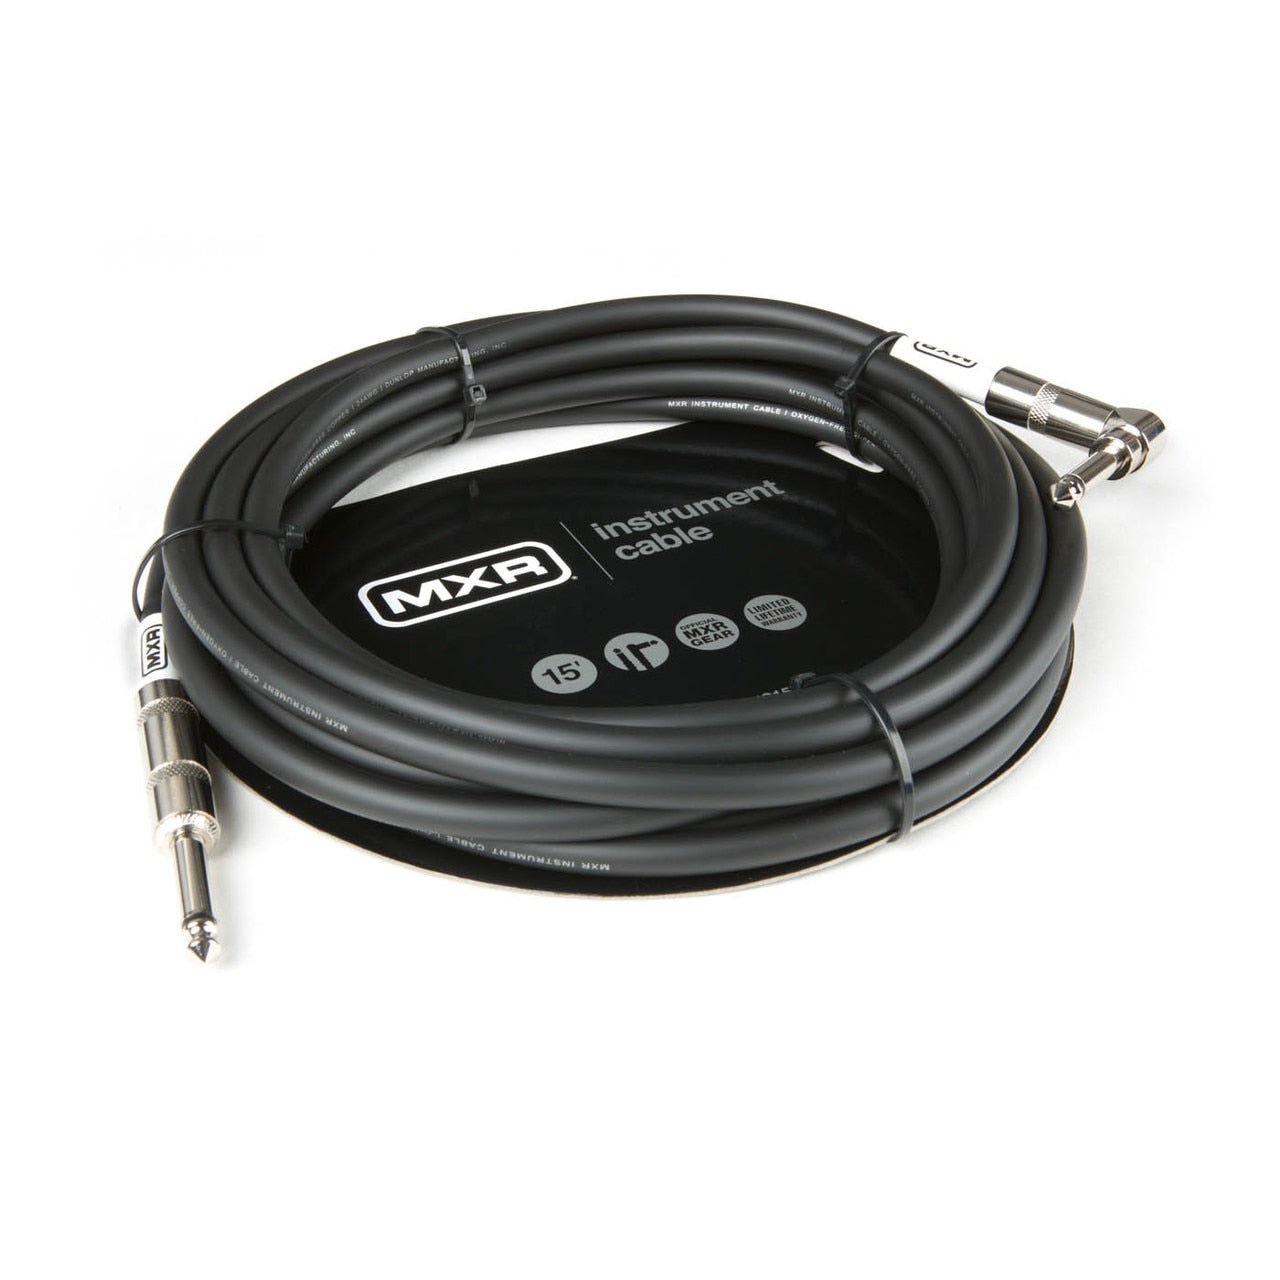 Dunlop MXR® 15FT Standard Instrument Cable - Right / Straight (DCIS15R)